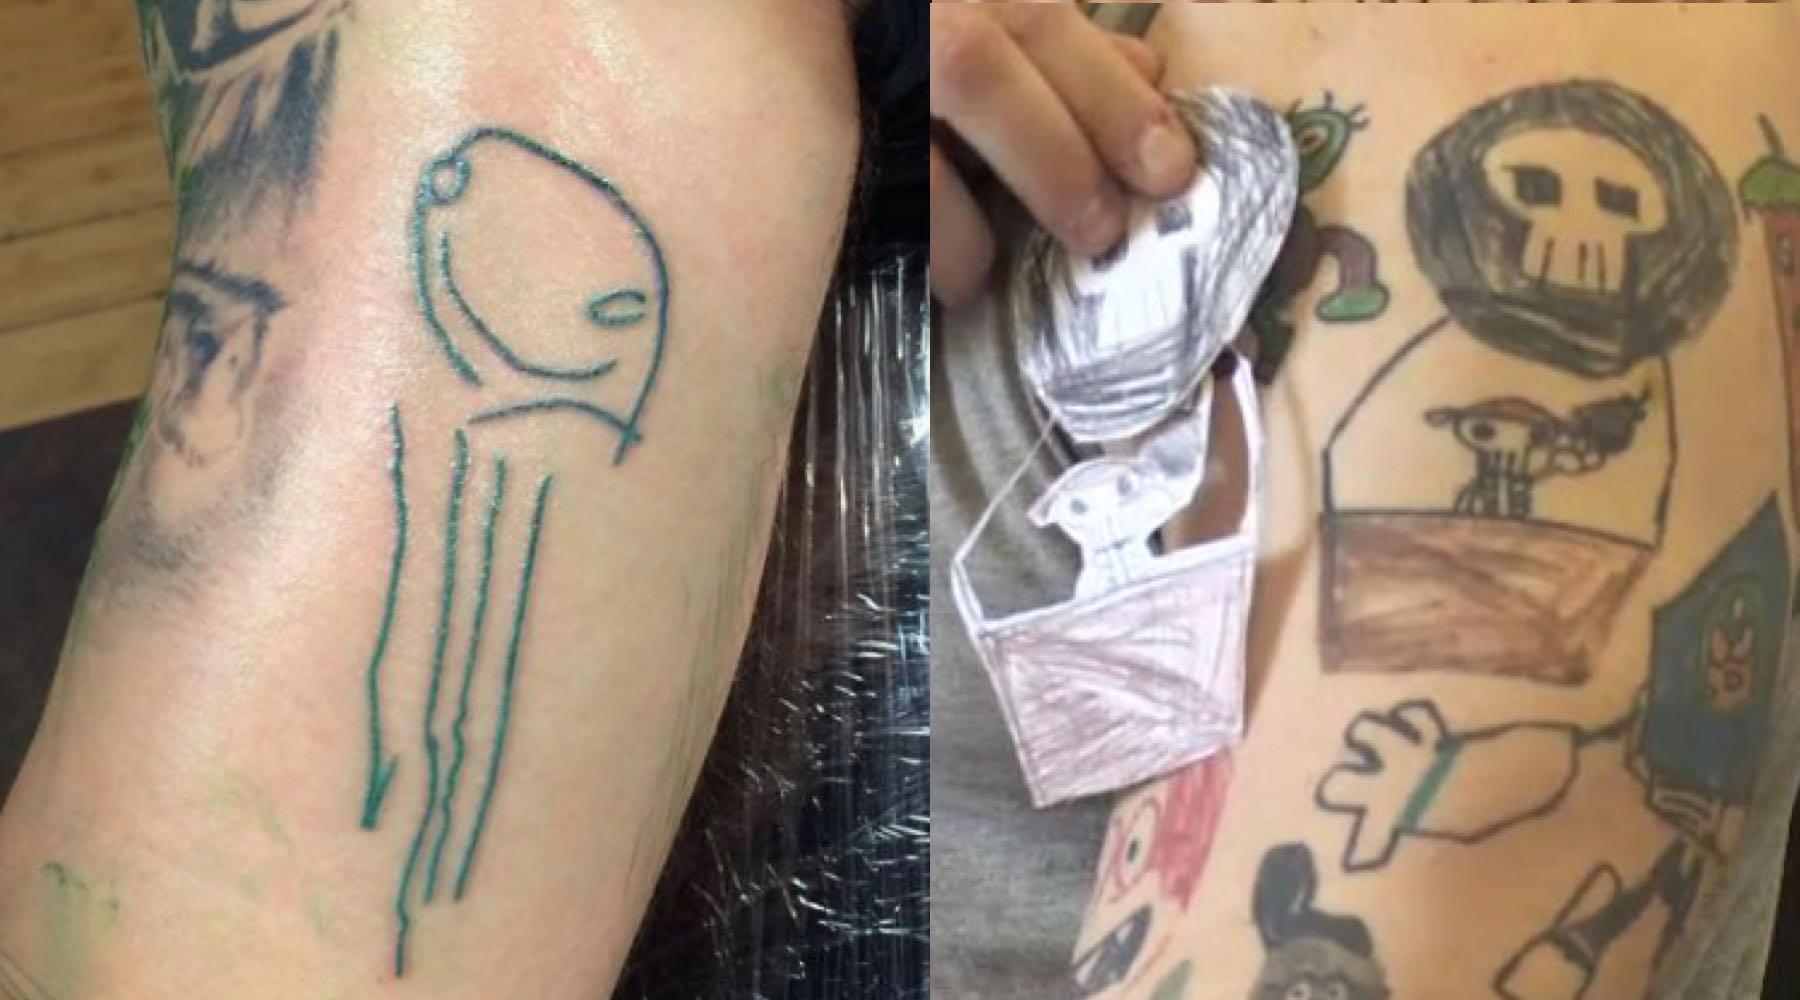 Parents Are Getting Their Kids' Doodles as Tattoos and People Have Opinions